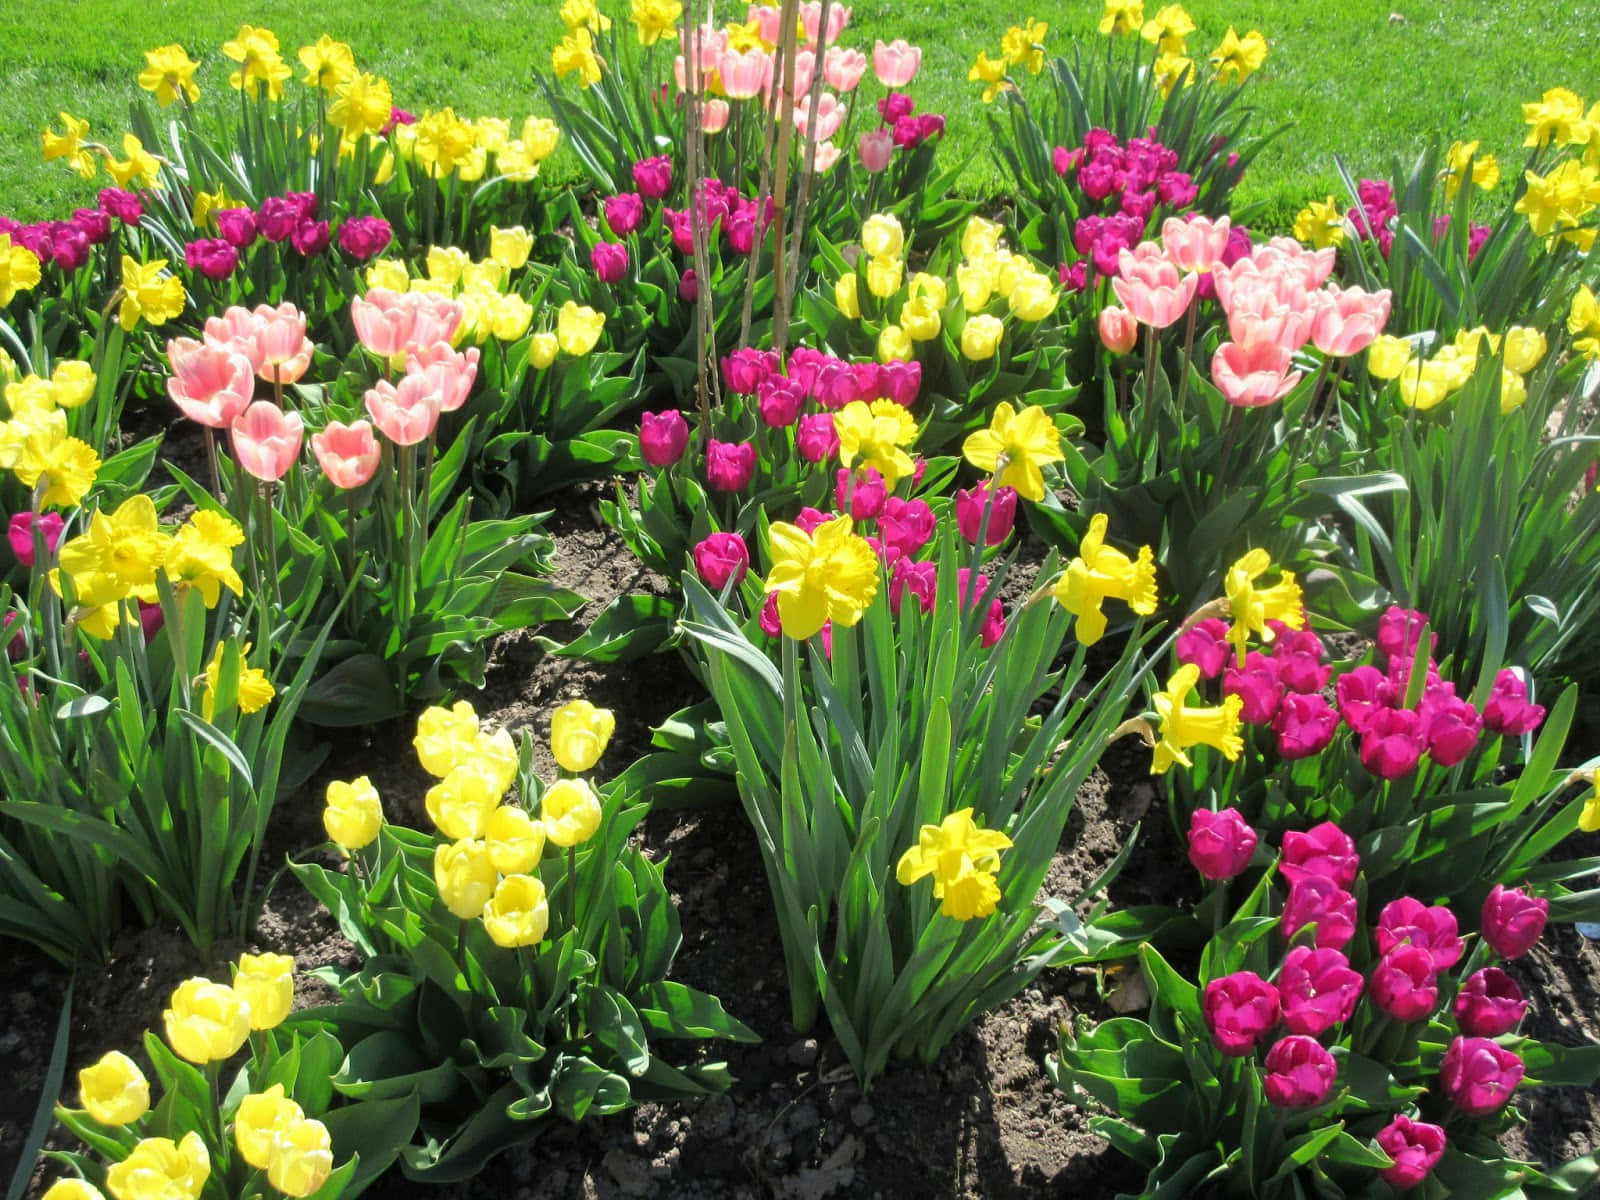 Vibrant Blooming Flowers in a Spring Garden Wallpaper